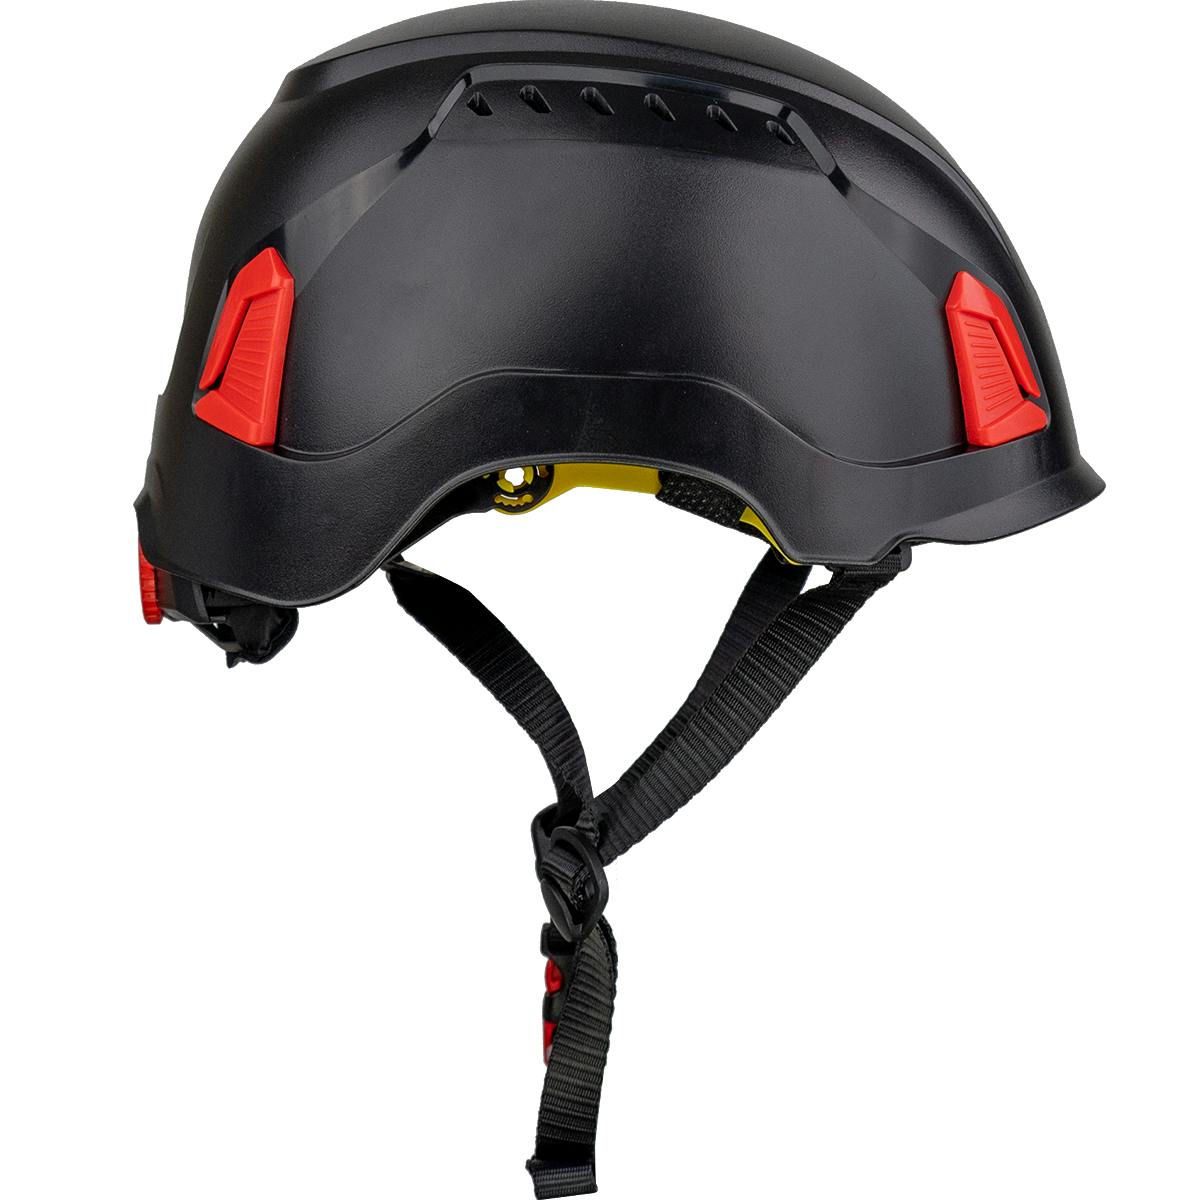 Traverse™ Vented, Industrial Climbing Helmet with Mips® Technology, ABS Shell, EPS Foam Impact Liner, HDPE Suspension, Wheel Ratchet Adjustment and 4-Point Chin Strap (280-HP1491RVM)_3